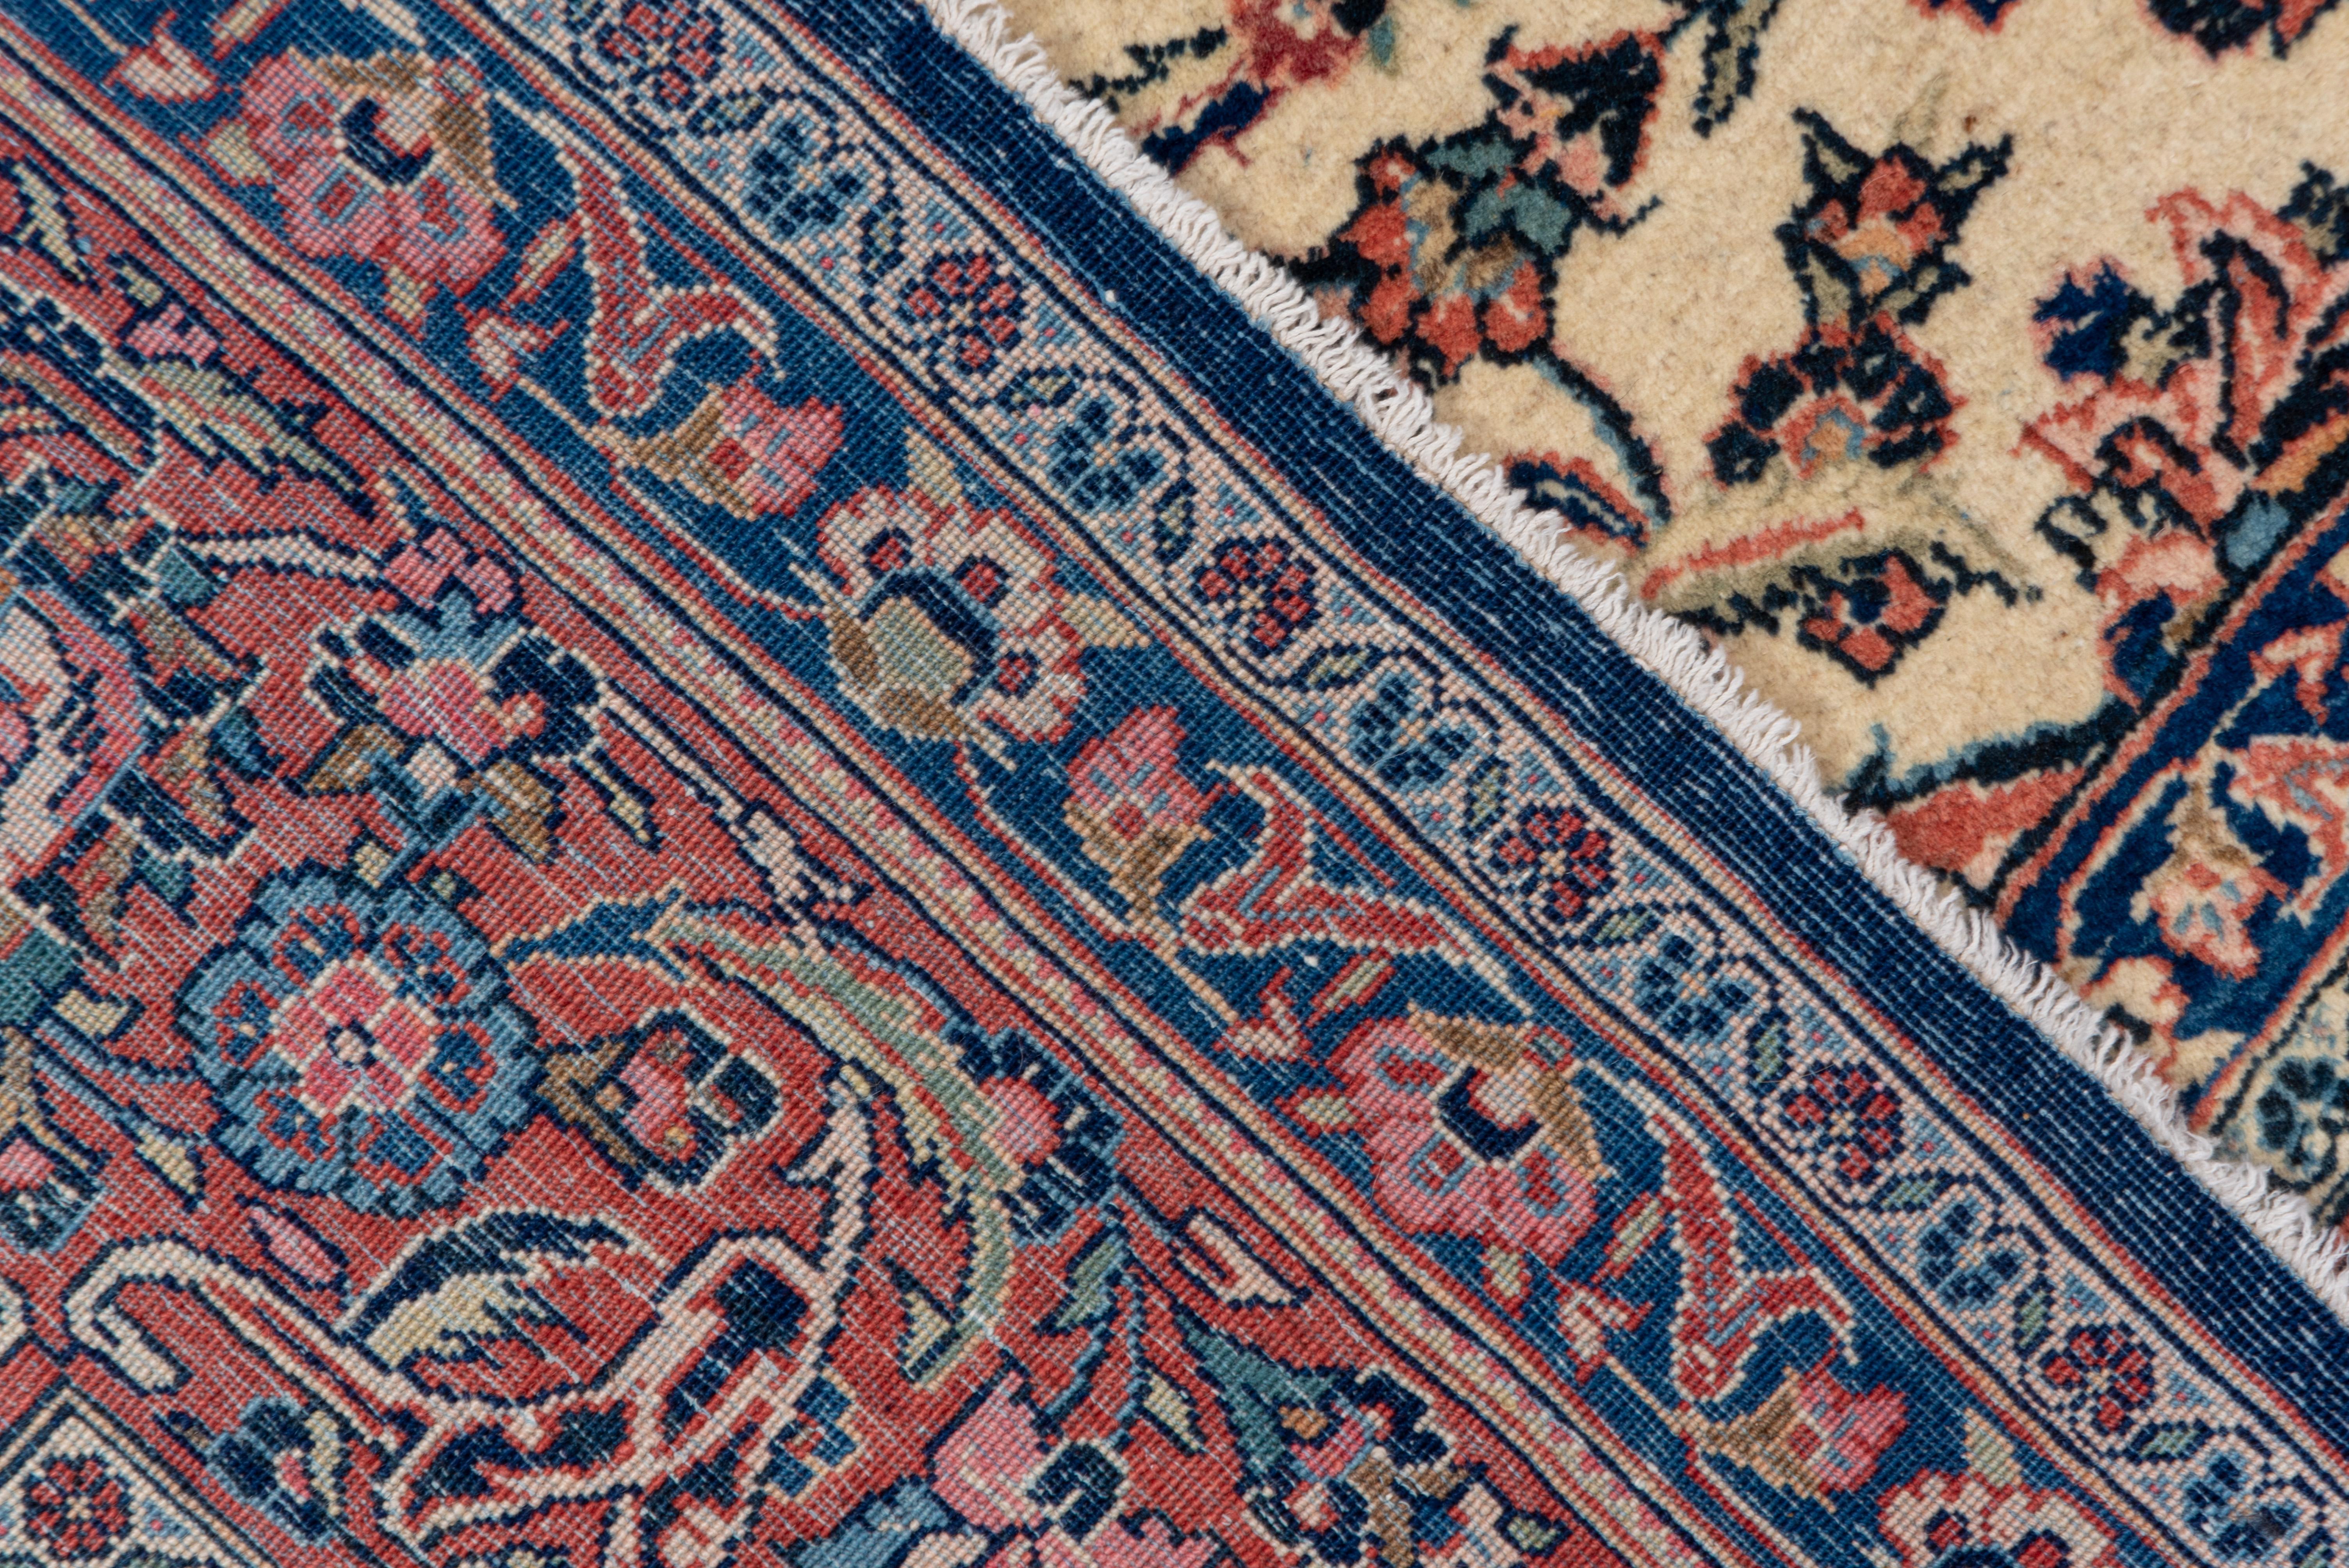 This is a Classic medium-fine, central Persian city carpet with a round navy medallion with pendant chains, on a cream sand field with palmettes,multi-level vinery and curved leaves. Small rose corners. Rose coral border with palmettes. Unusual